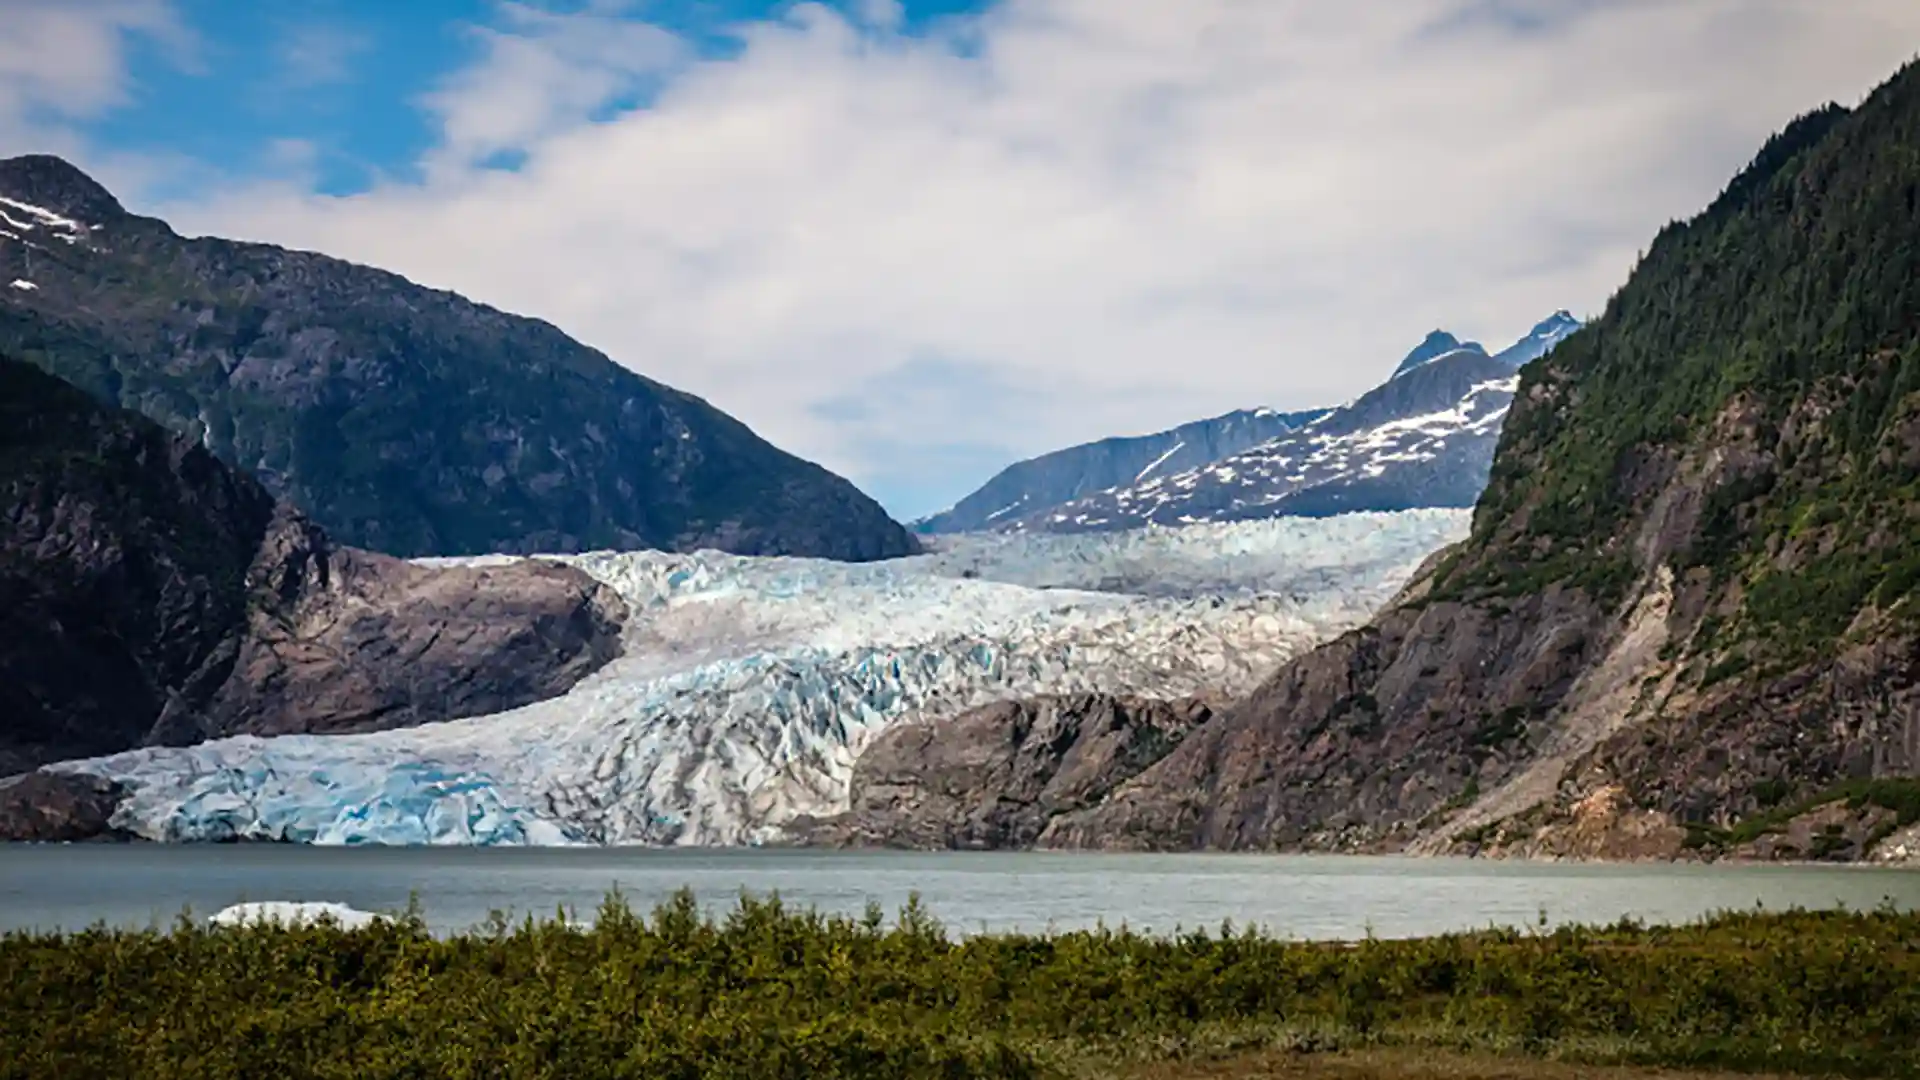 View of Mendenhall Glacier in Alaska, surrounded by rocky mountains covered in forest and snow.